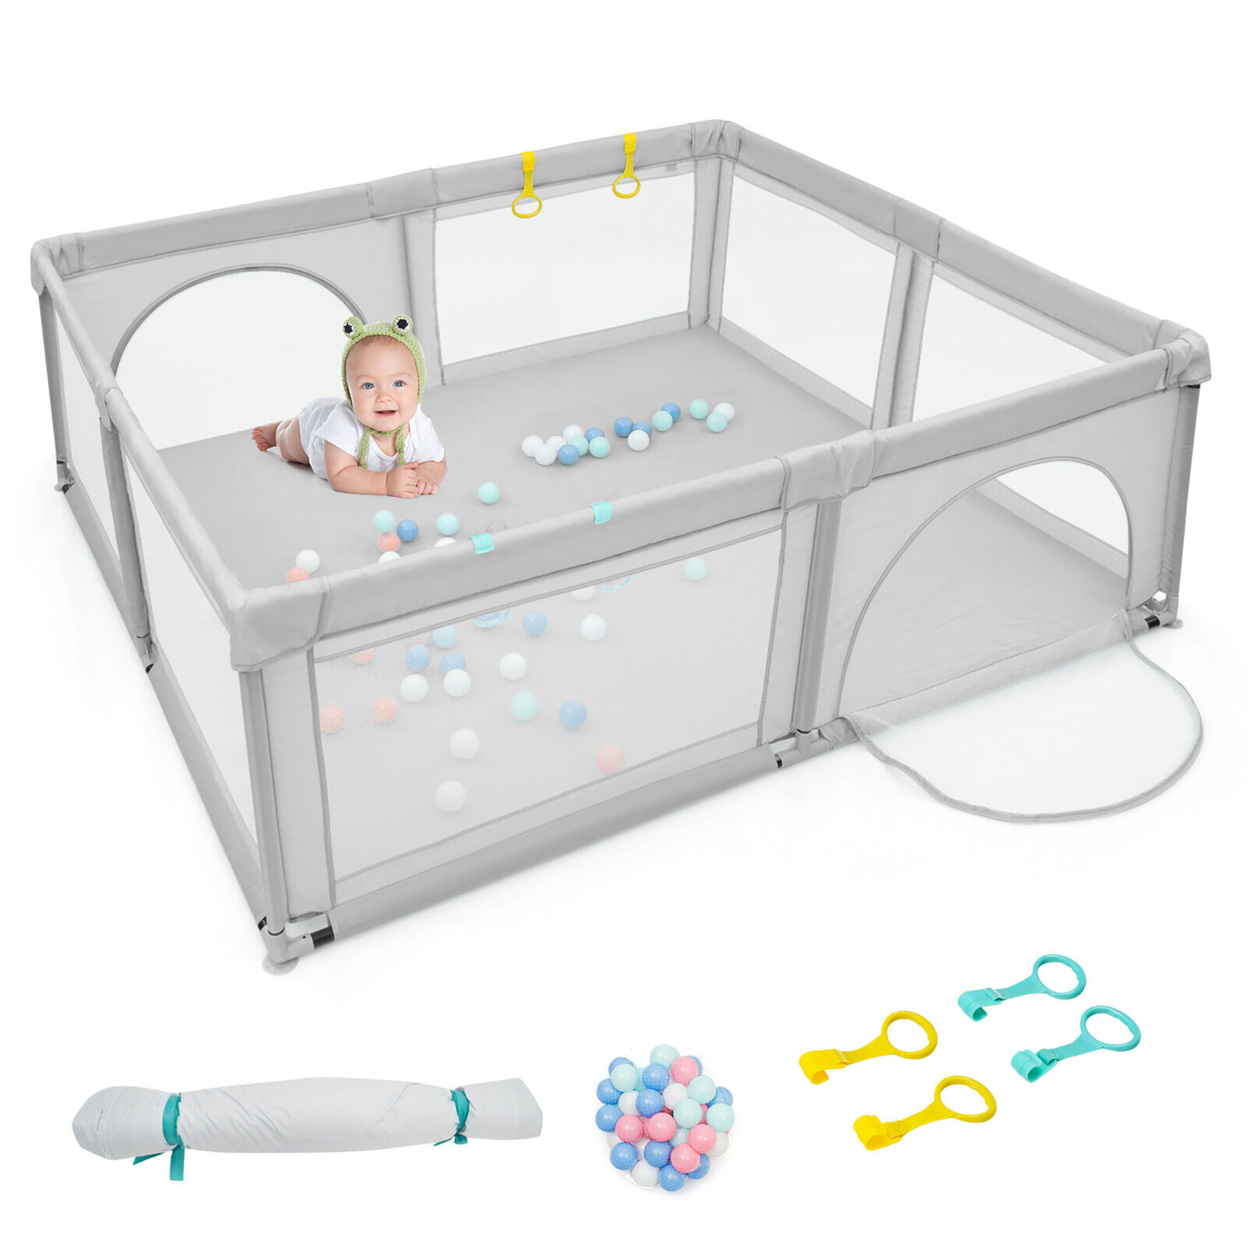 Extra Large Baby Playpen Safety Baby Play Yard W/ 50 Ocean Balls & 4 Handles - Multi-color